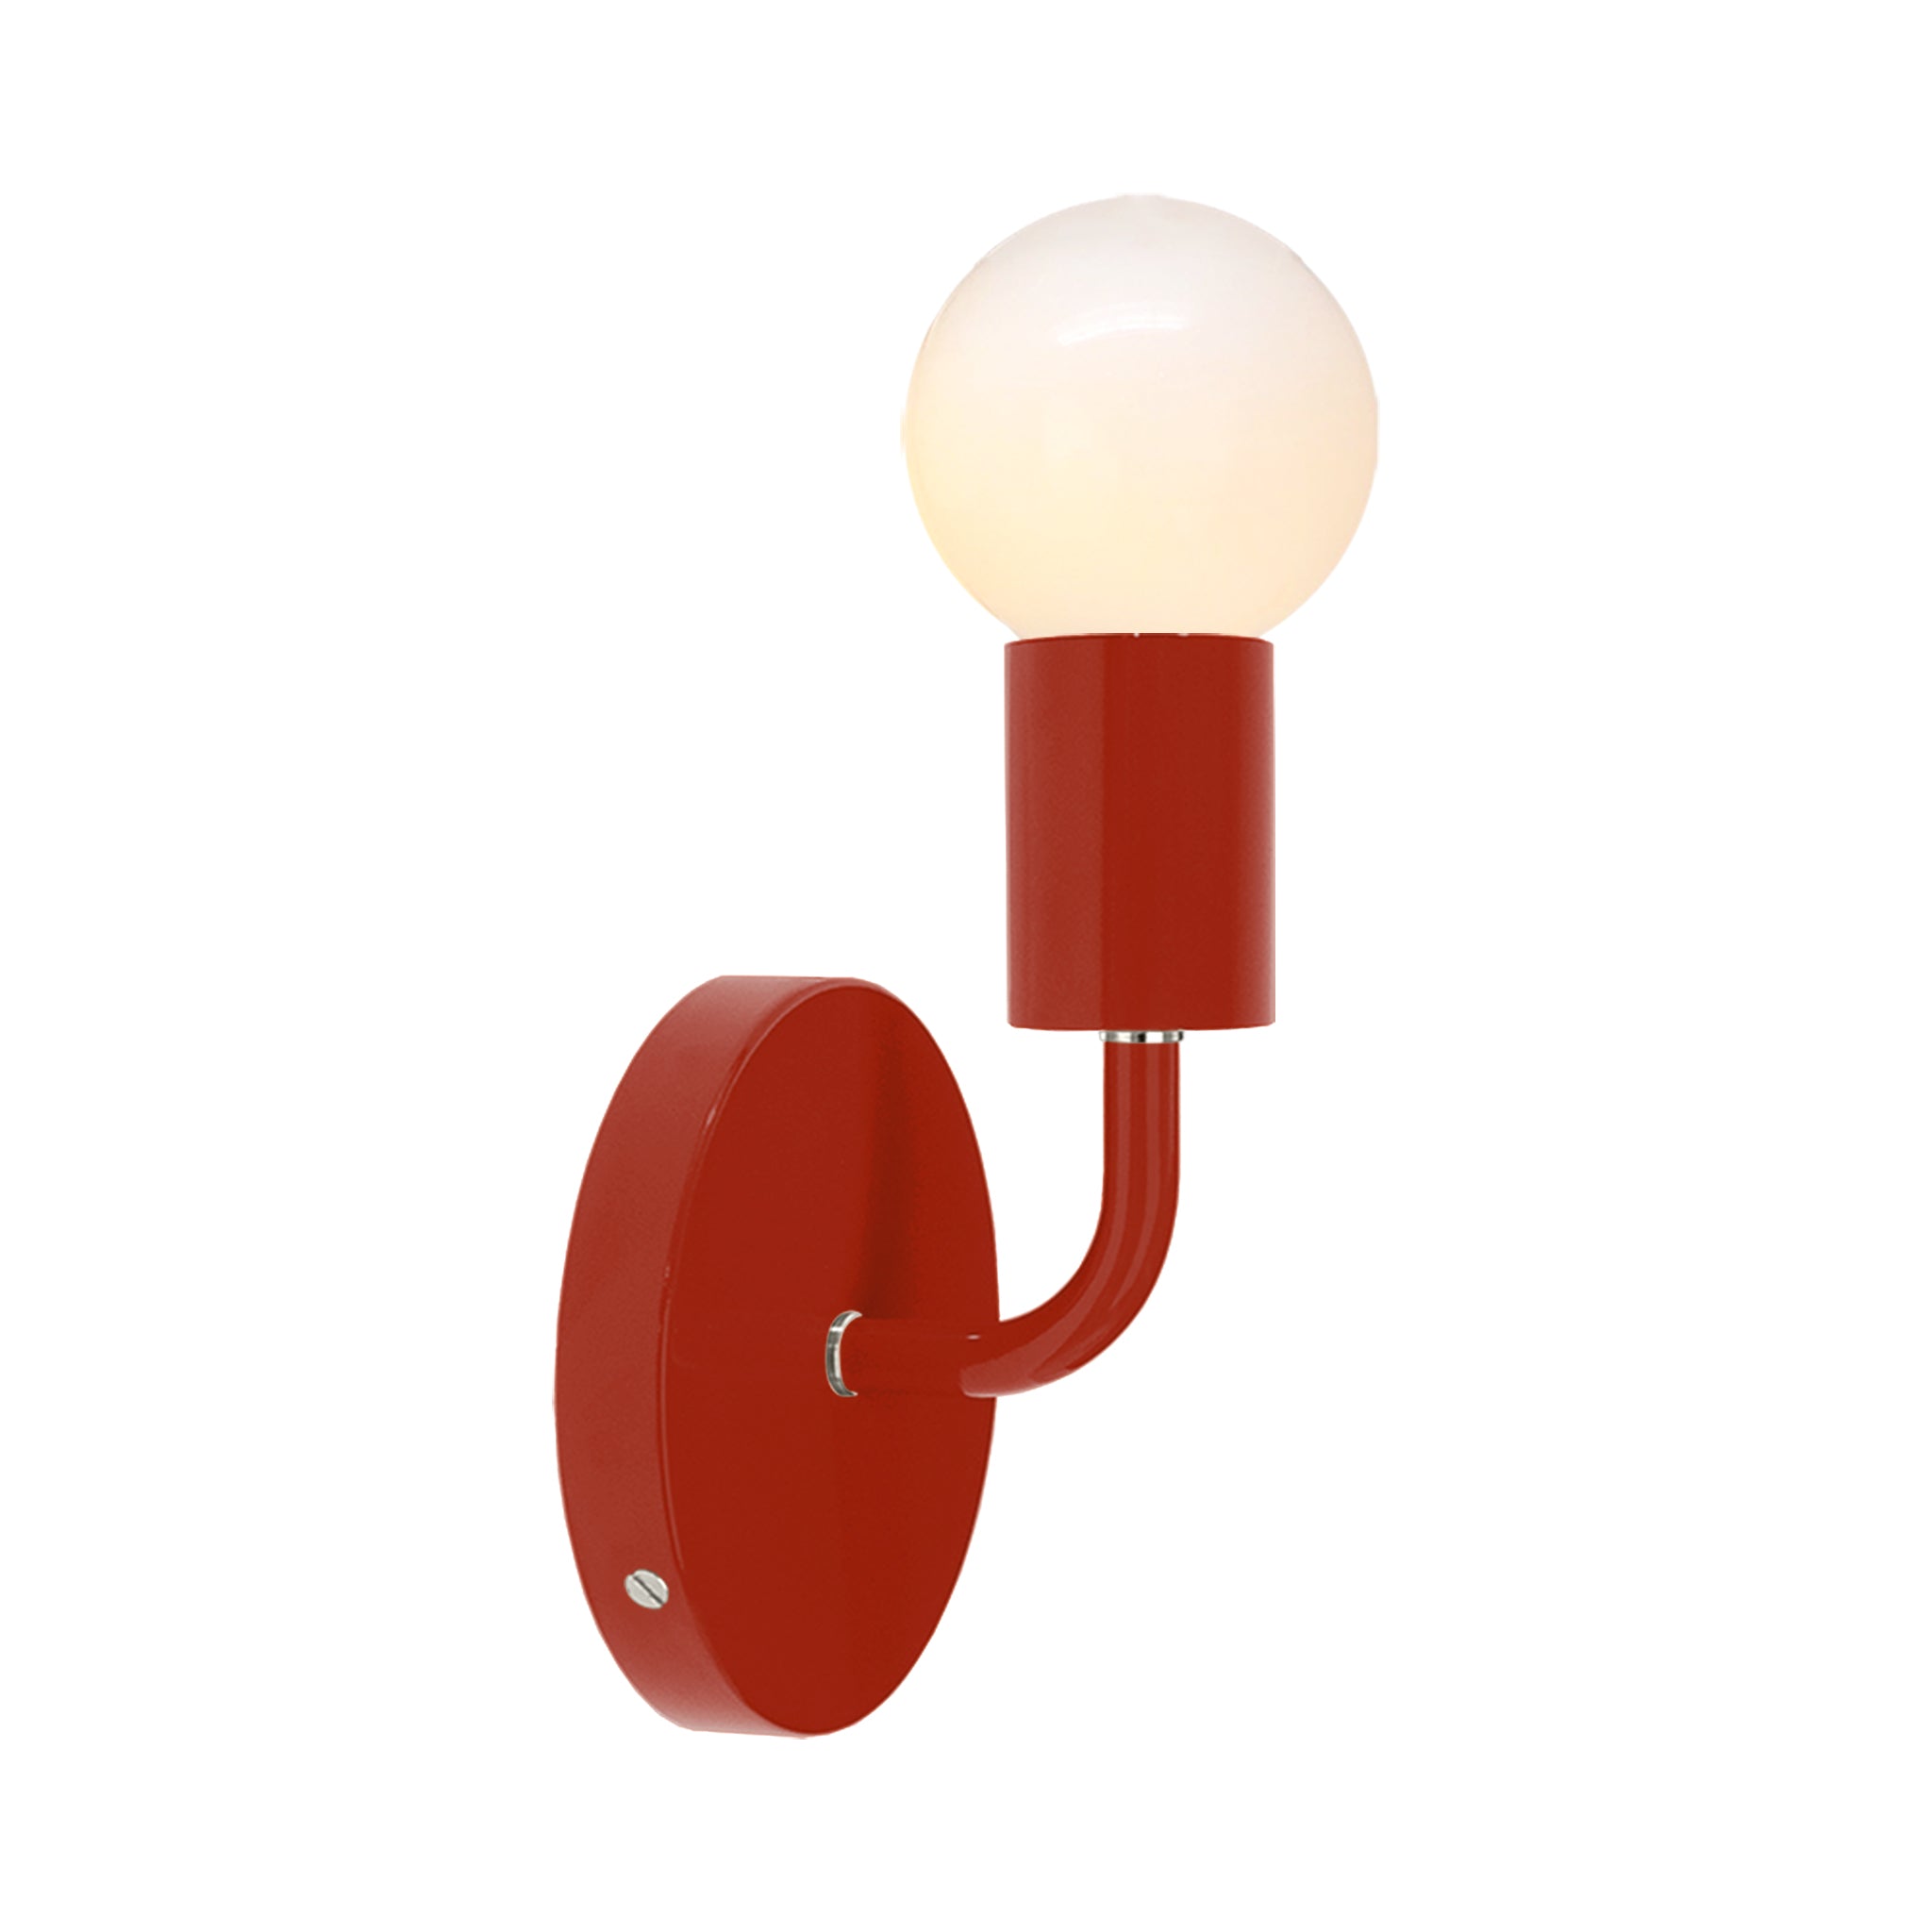 Nickel and riding hood red color Snug sconce Dutton Brown lighting